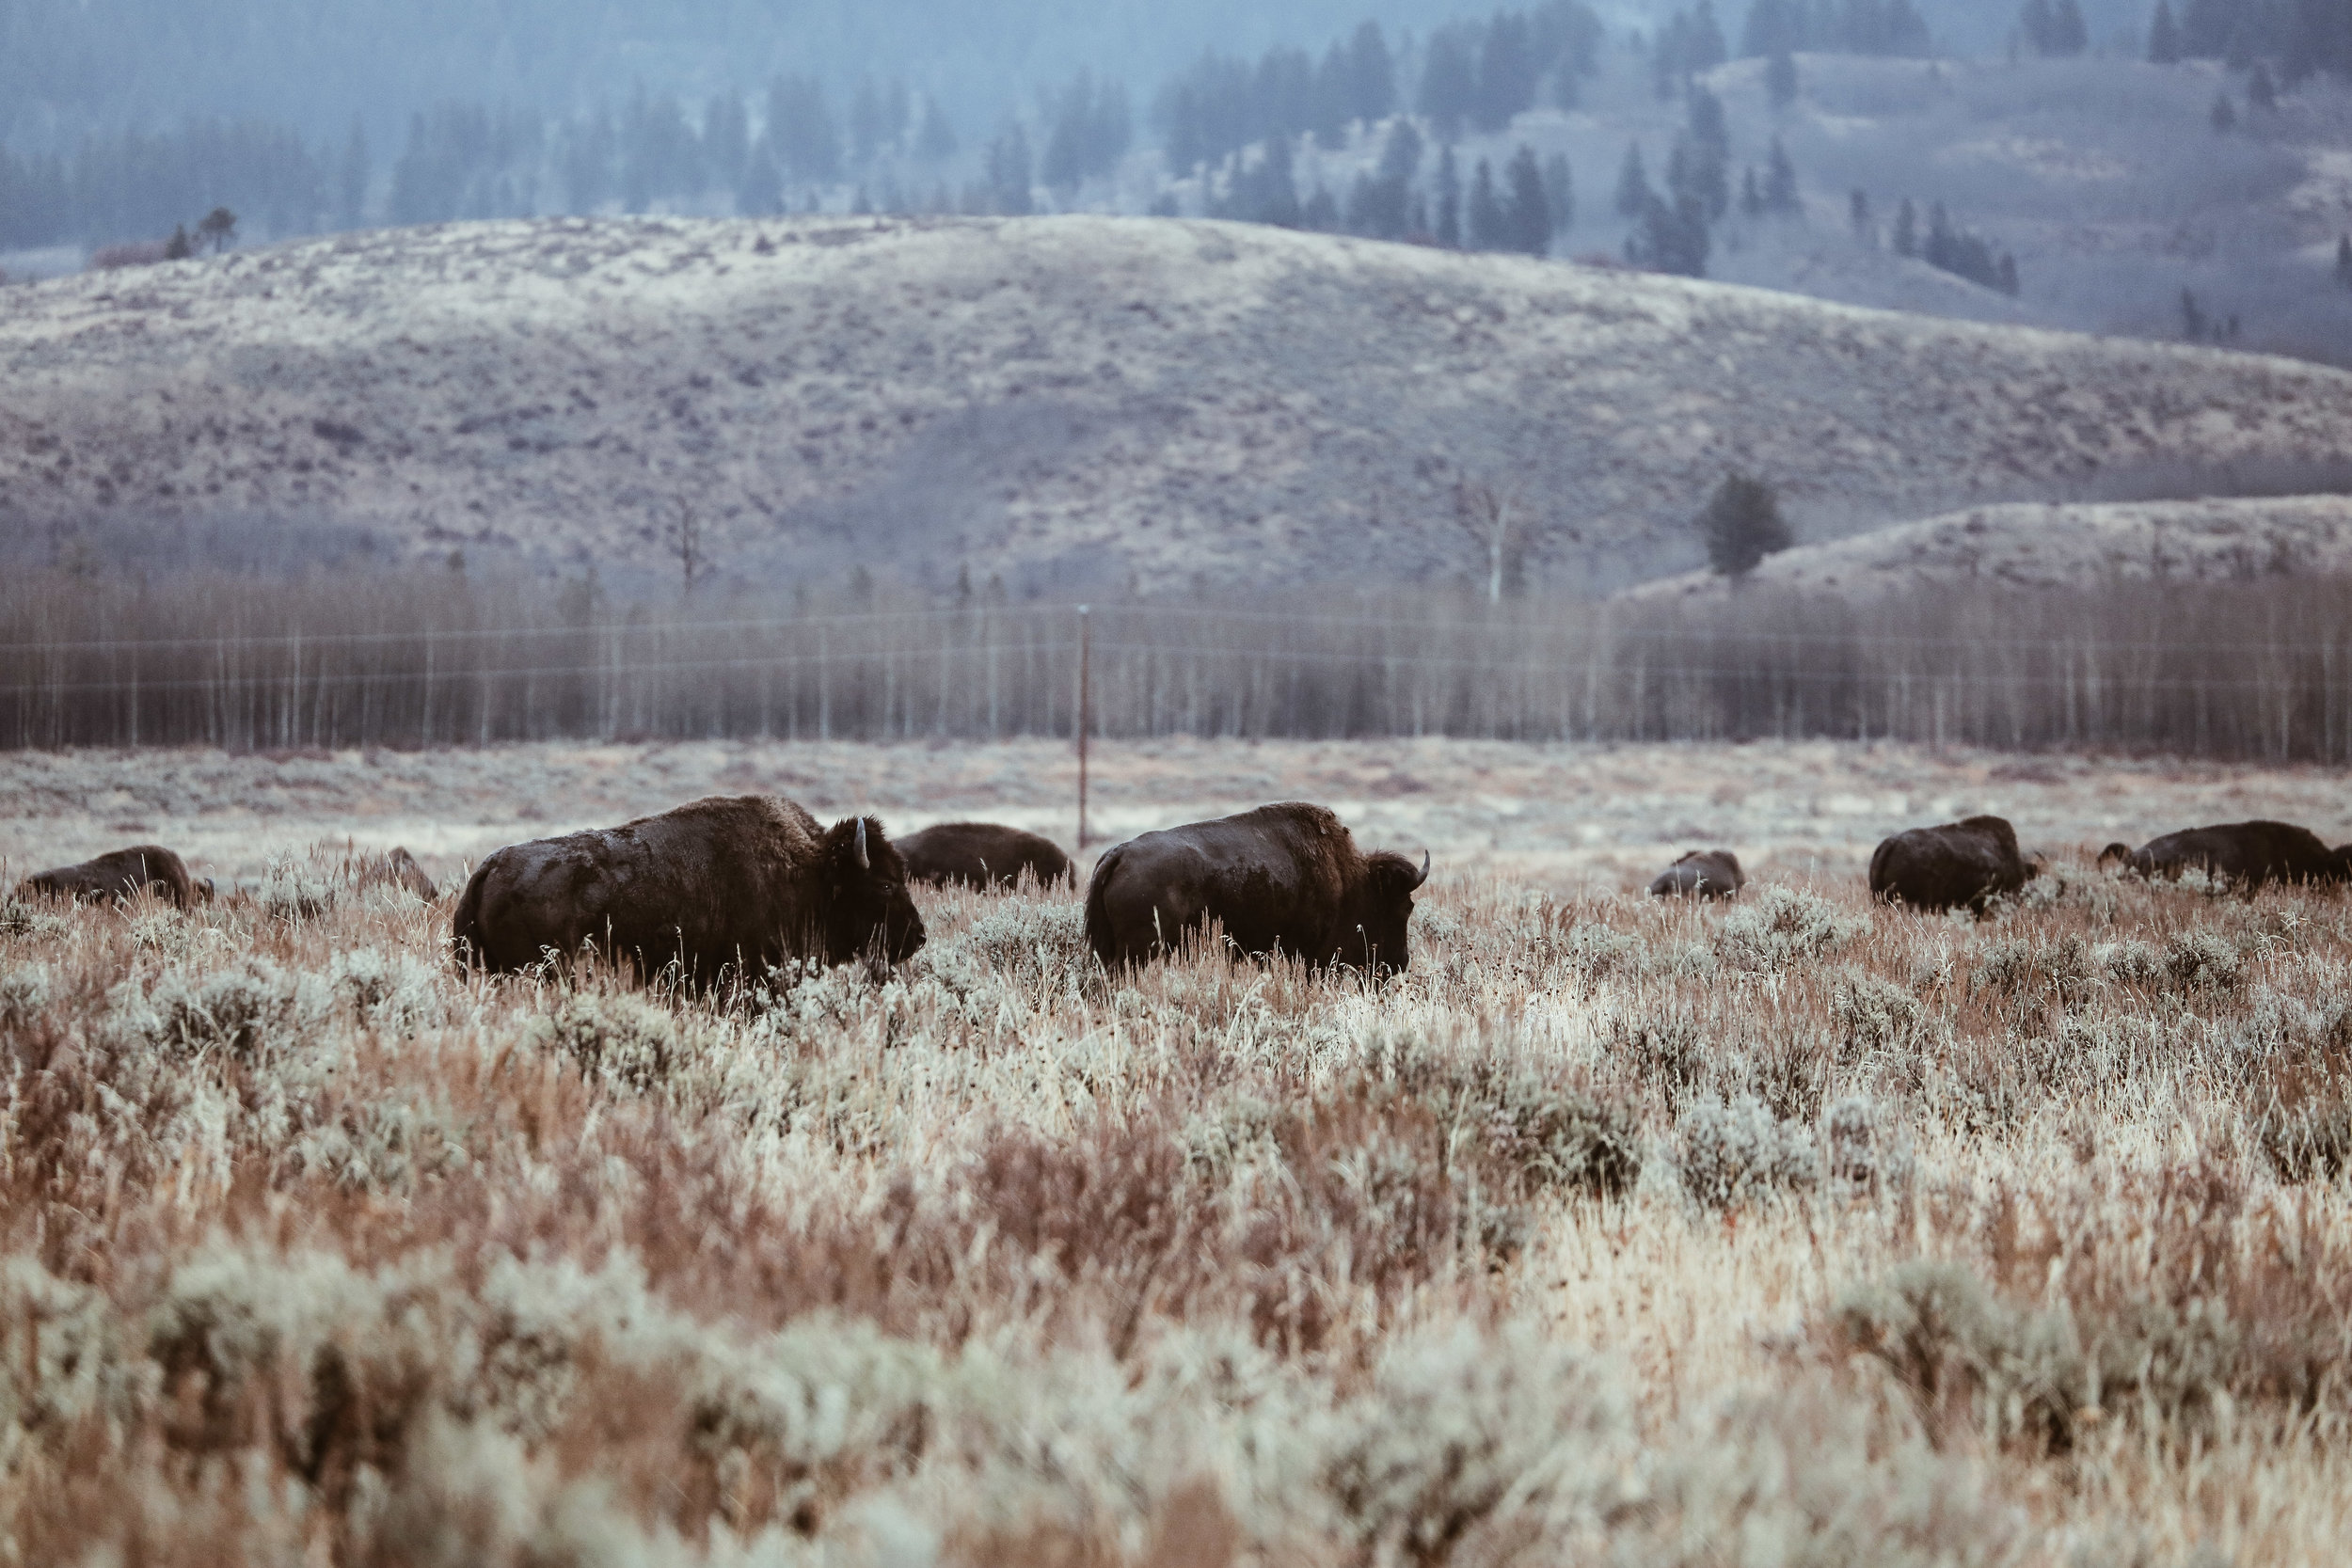 Bison spotted on our tour with Jackson Hole Wildlife Safaris